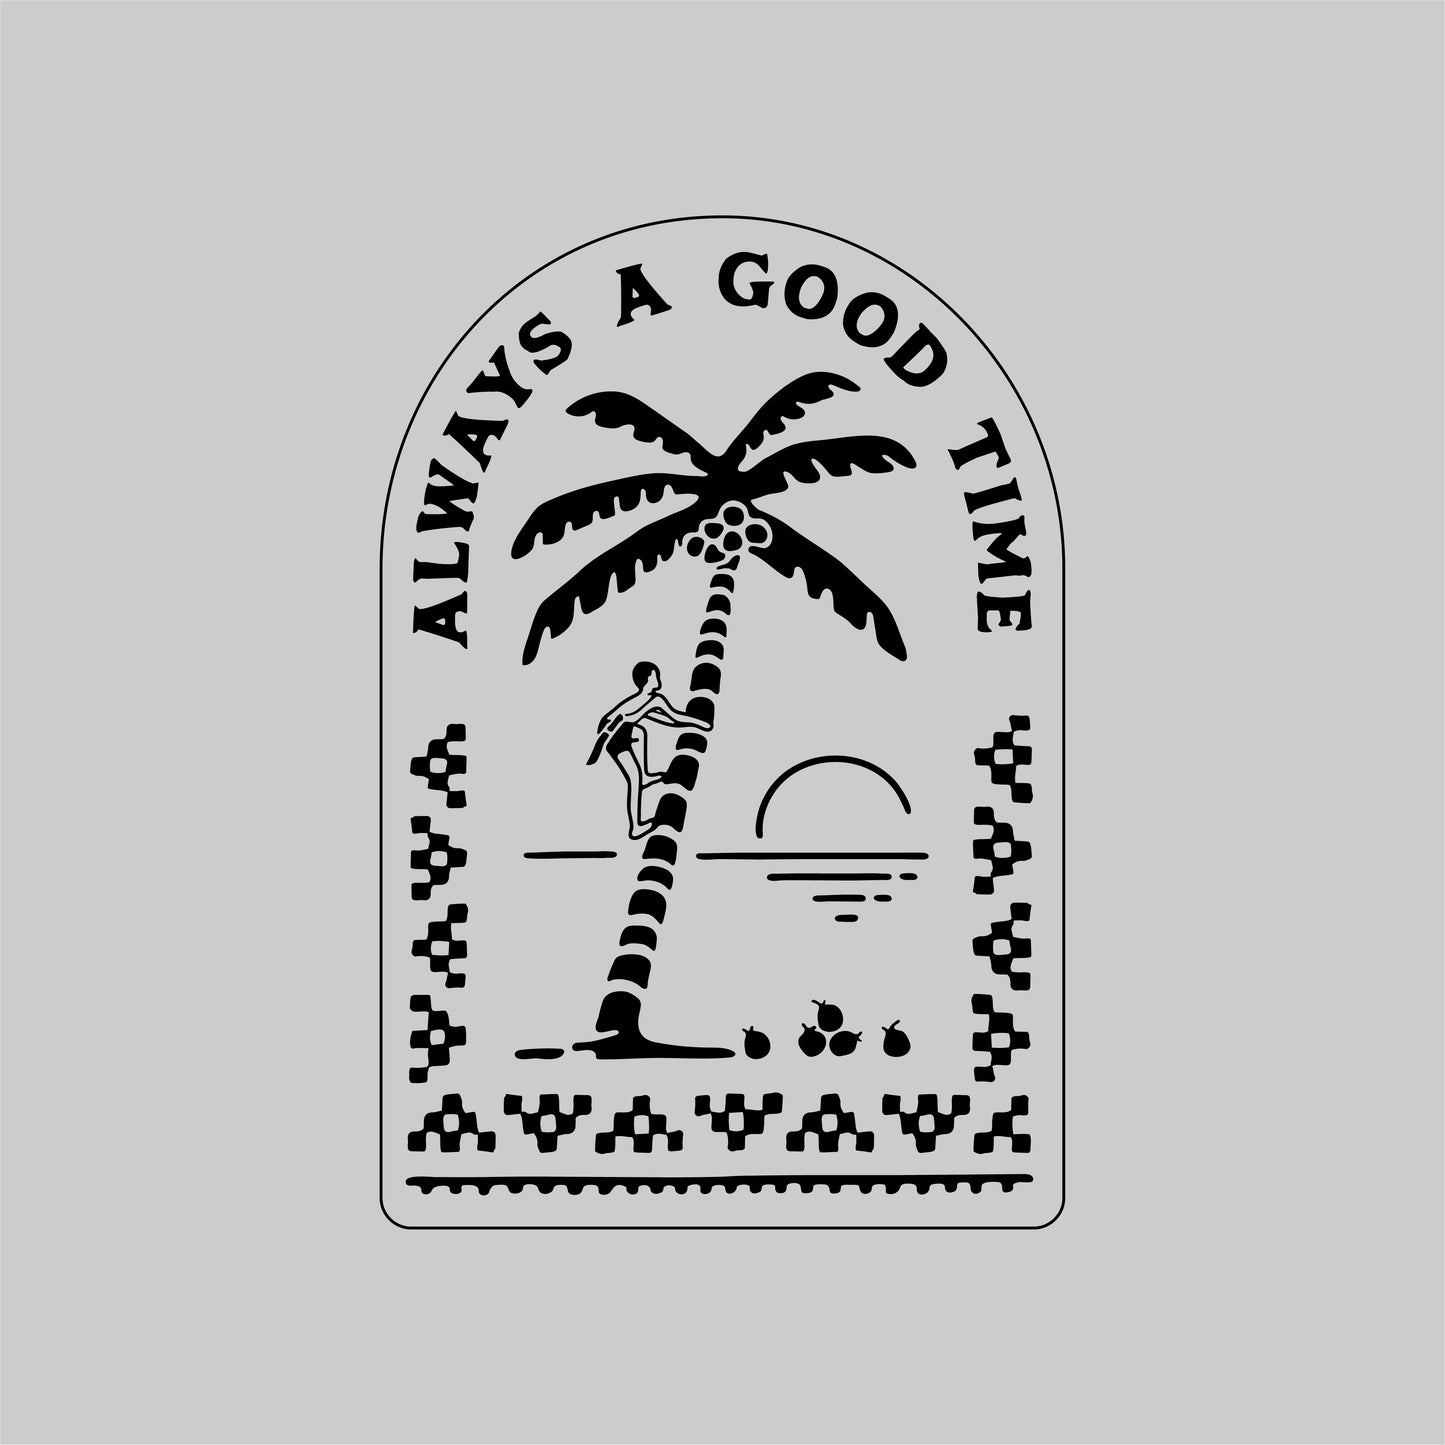 Good Times Stickers